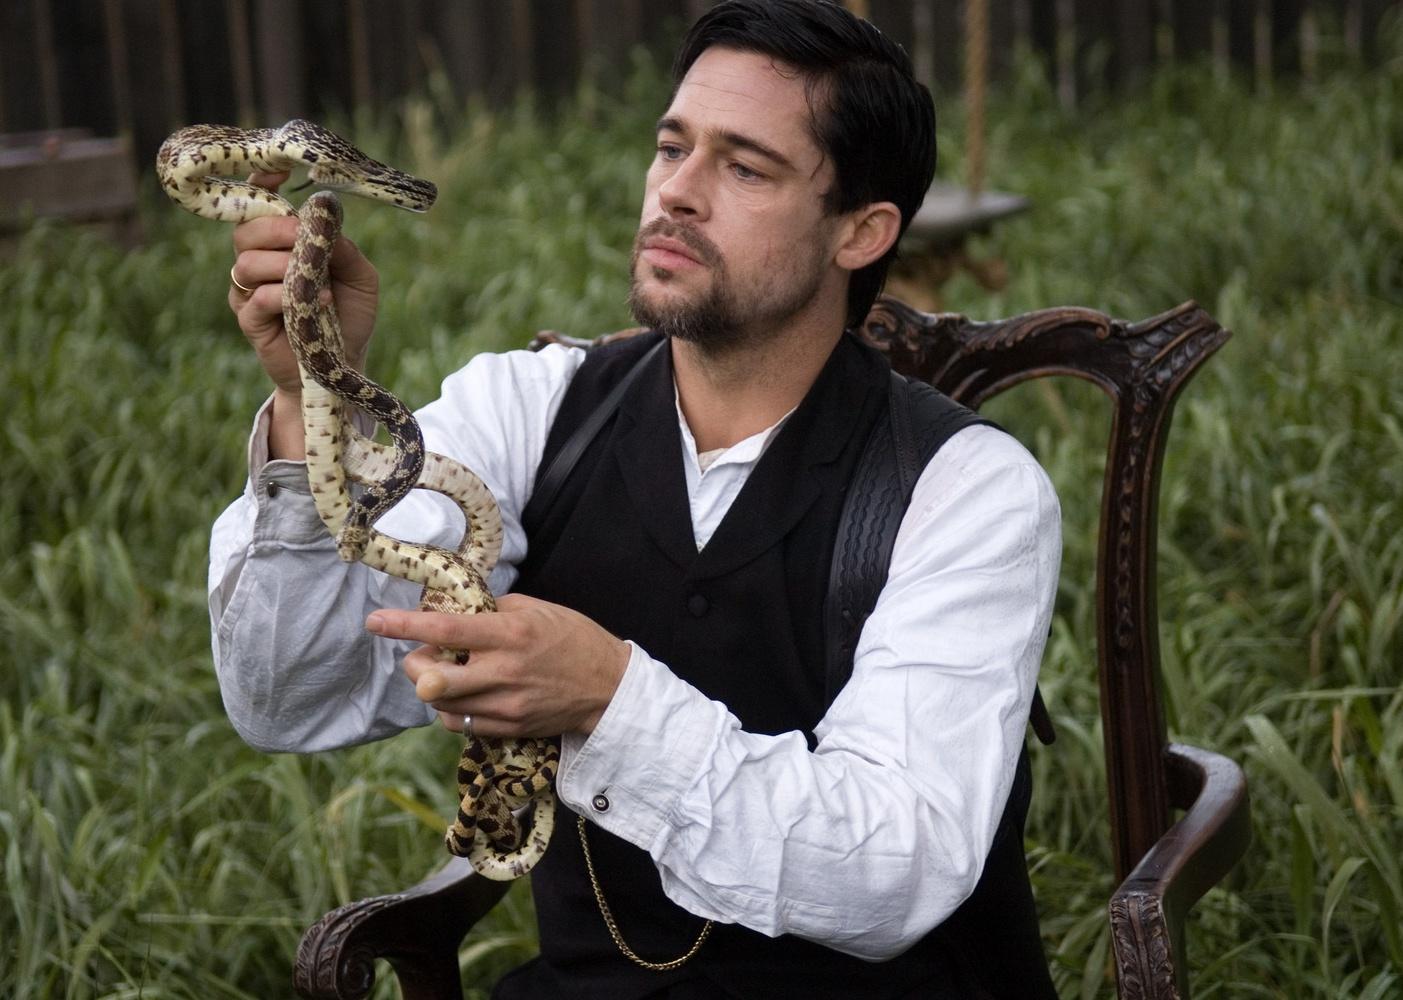 Brad Pitt in a Western shirt and vest sitting in a wooden chair outside holding a snake.